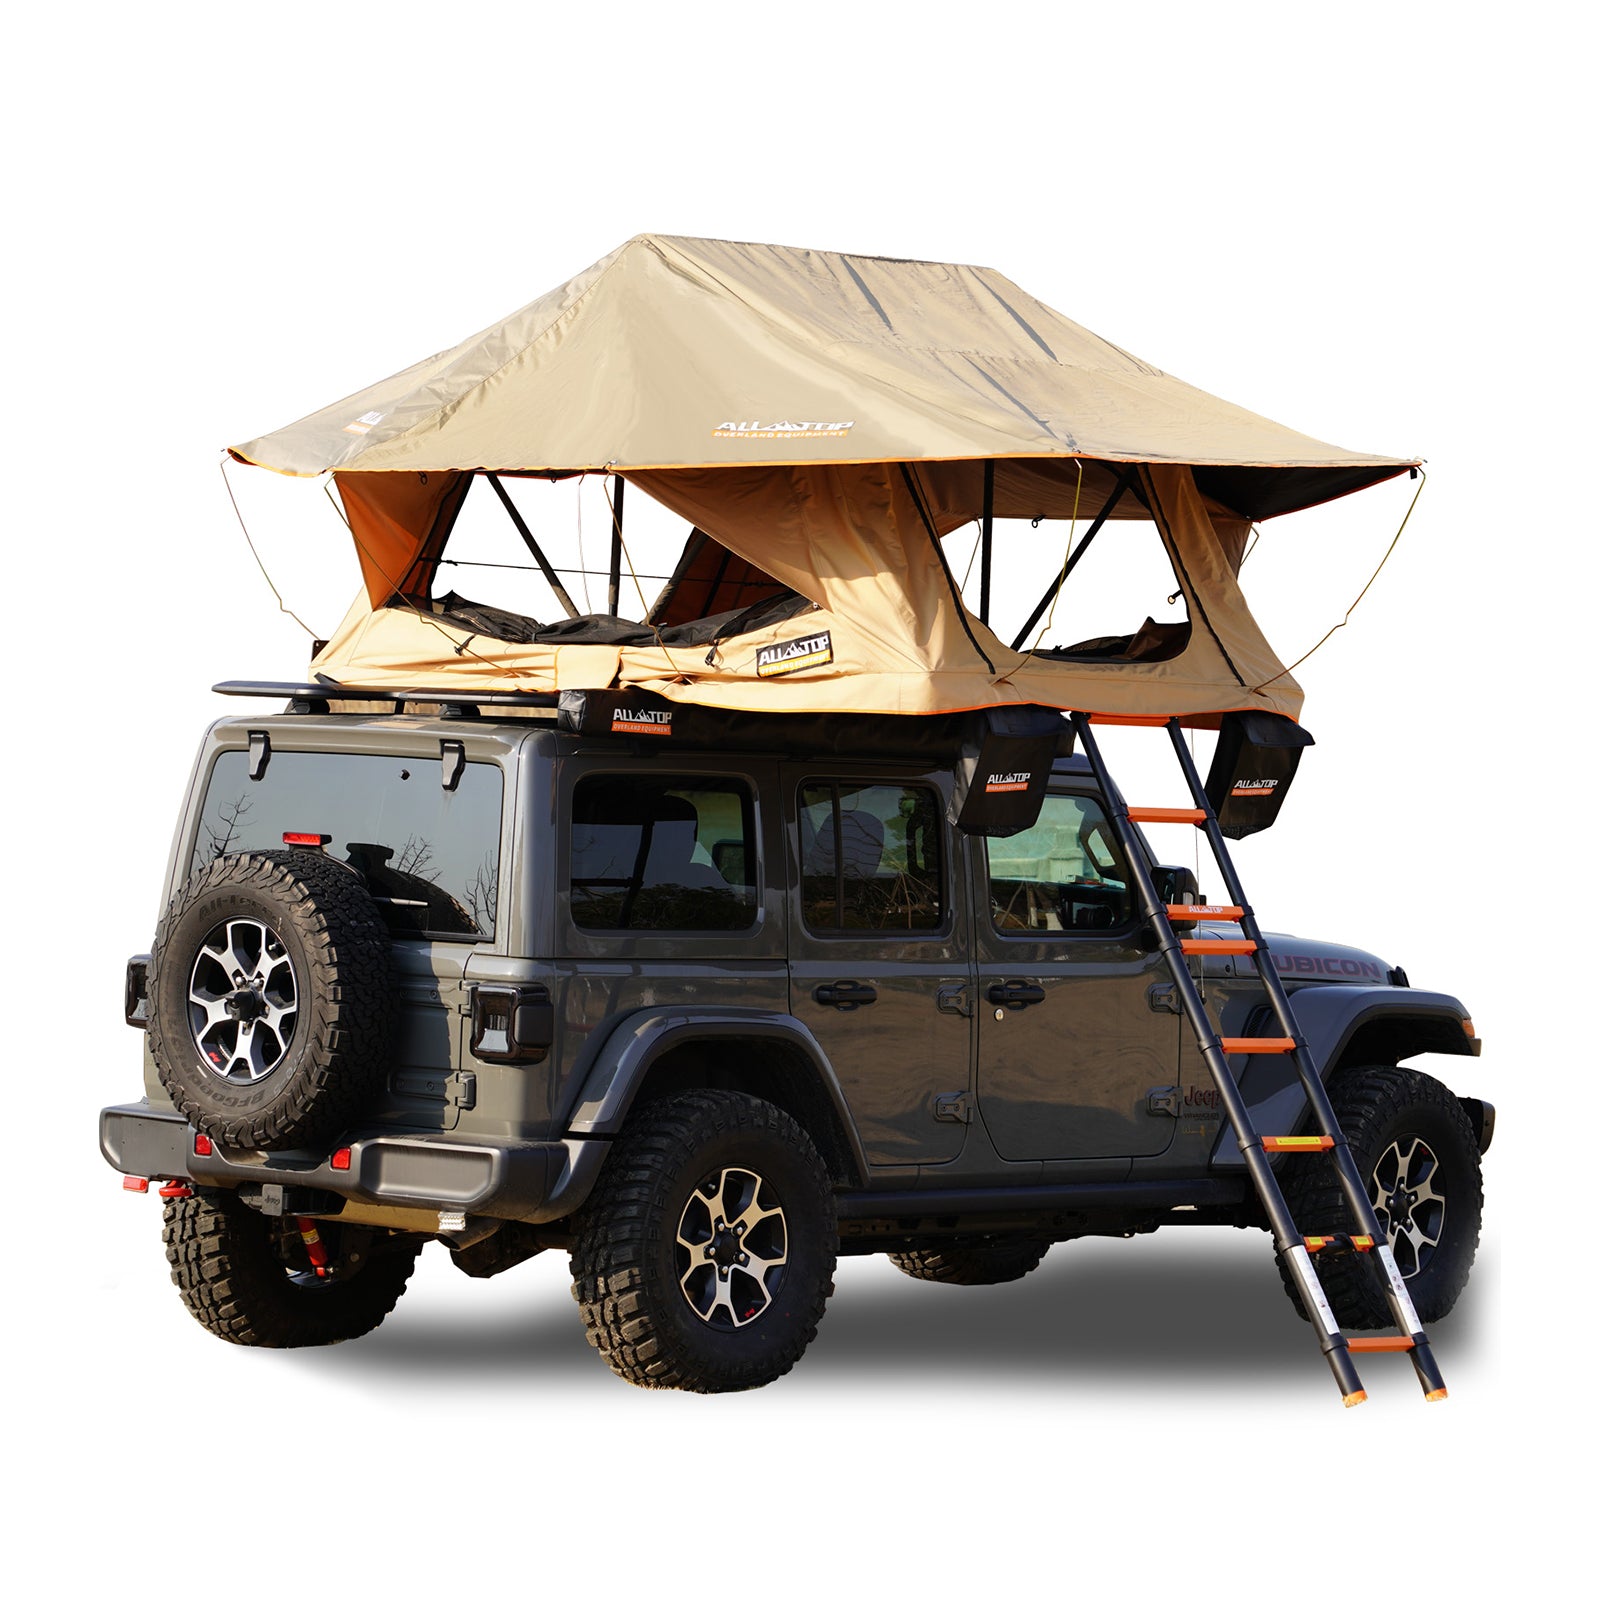 VEHICLE AWNING & ROOFTOP TENT